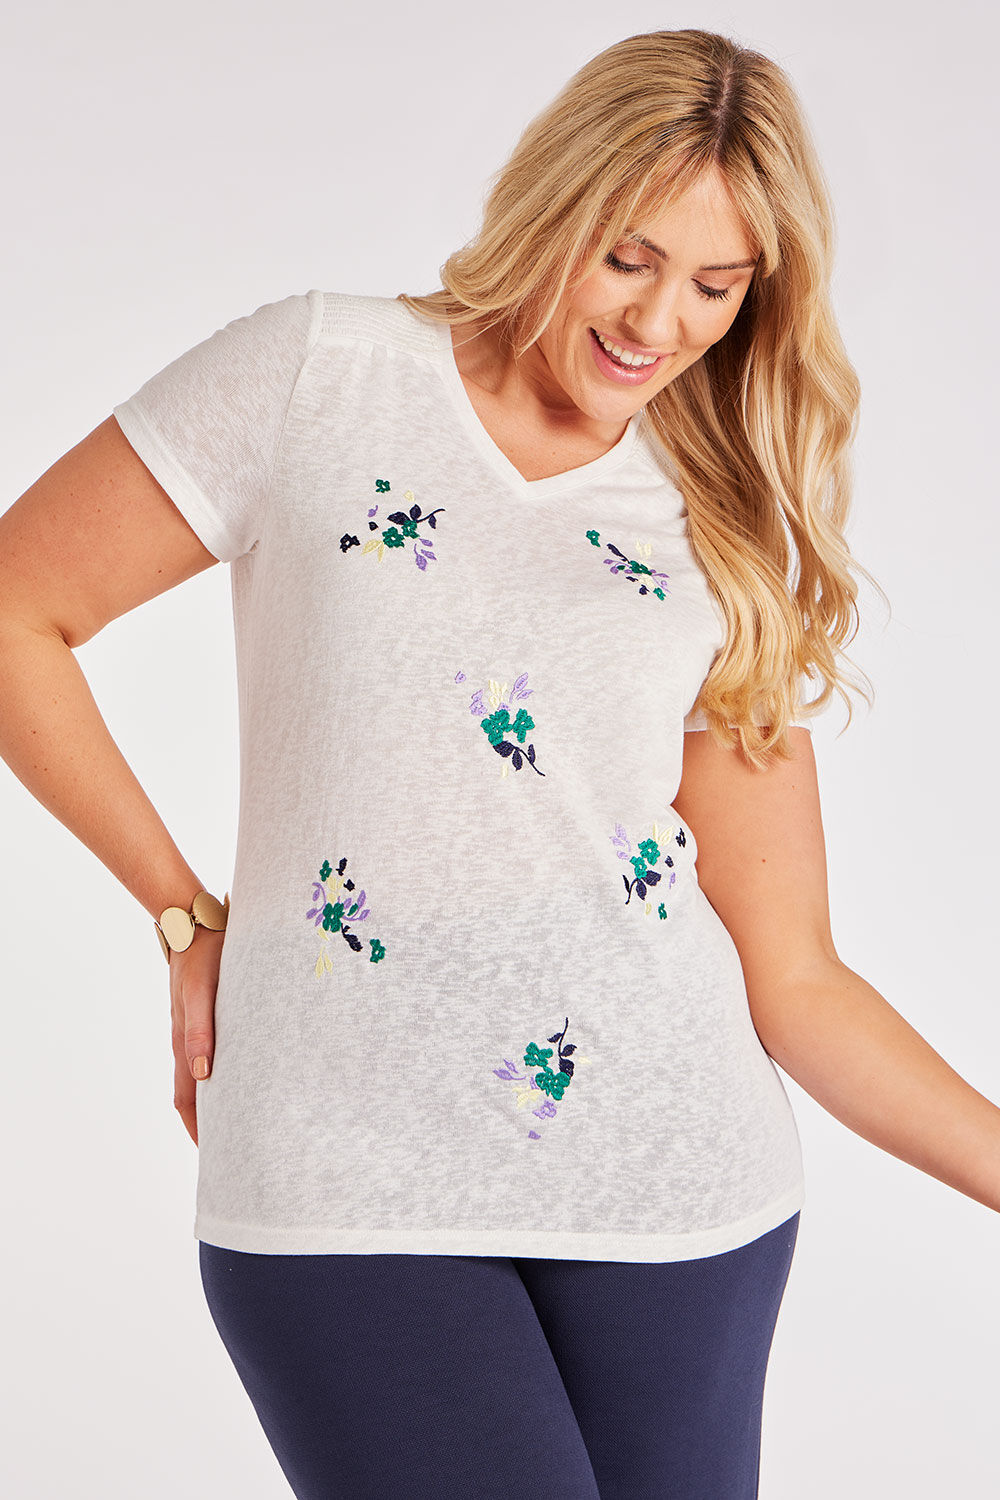 Bonmarche Ivory Short Sleeves Embroidered Flower T-Shirt, Size: 20